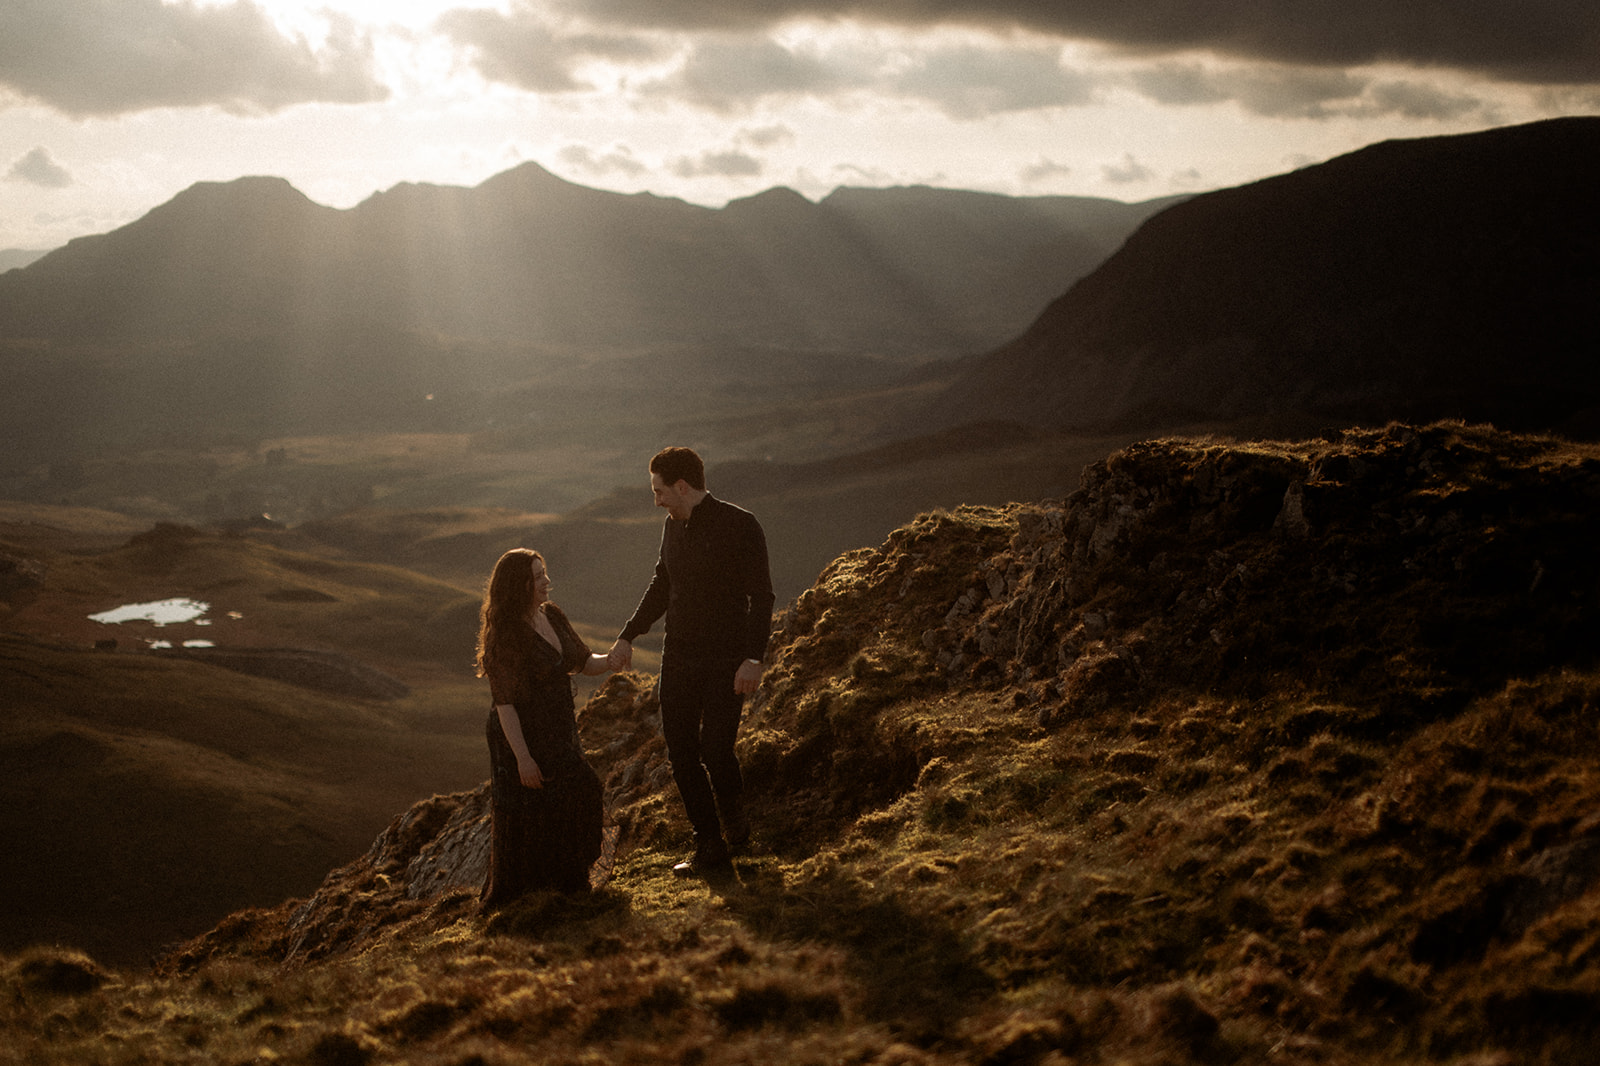 A couple enjoying their pre-wedding photography adventure at sunset in Snowdonia.